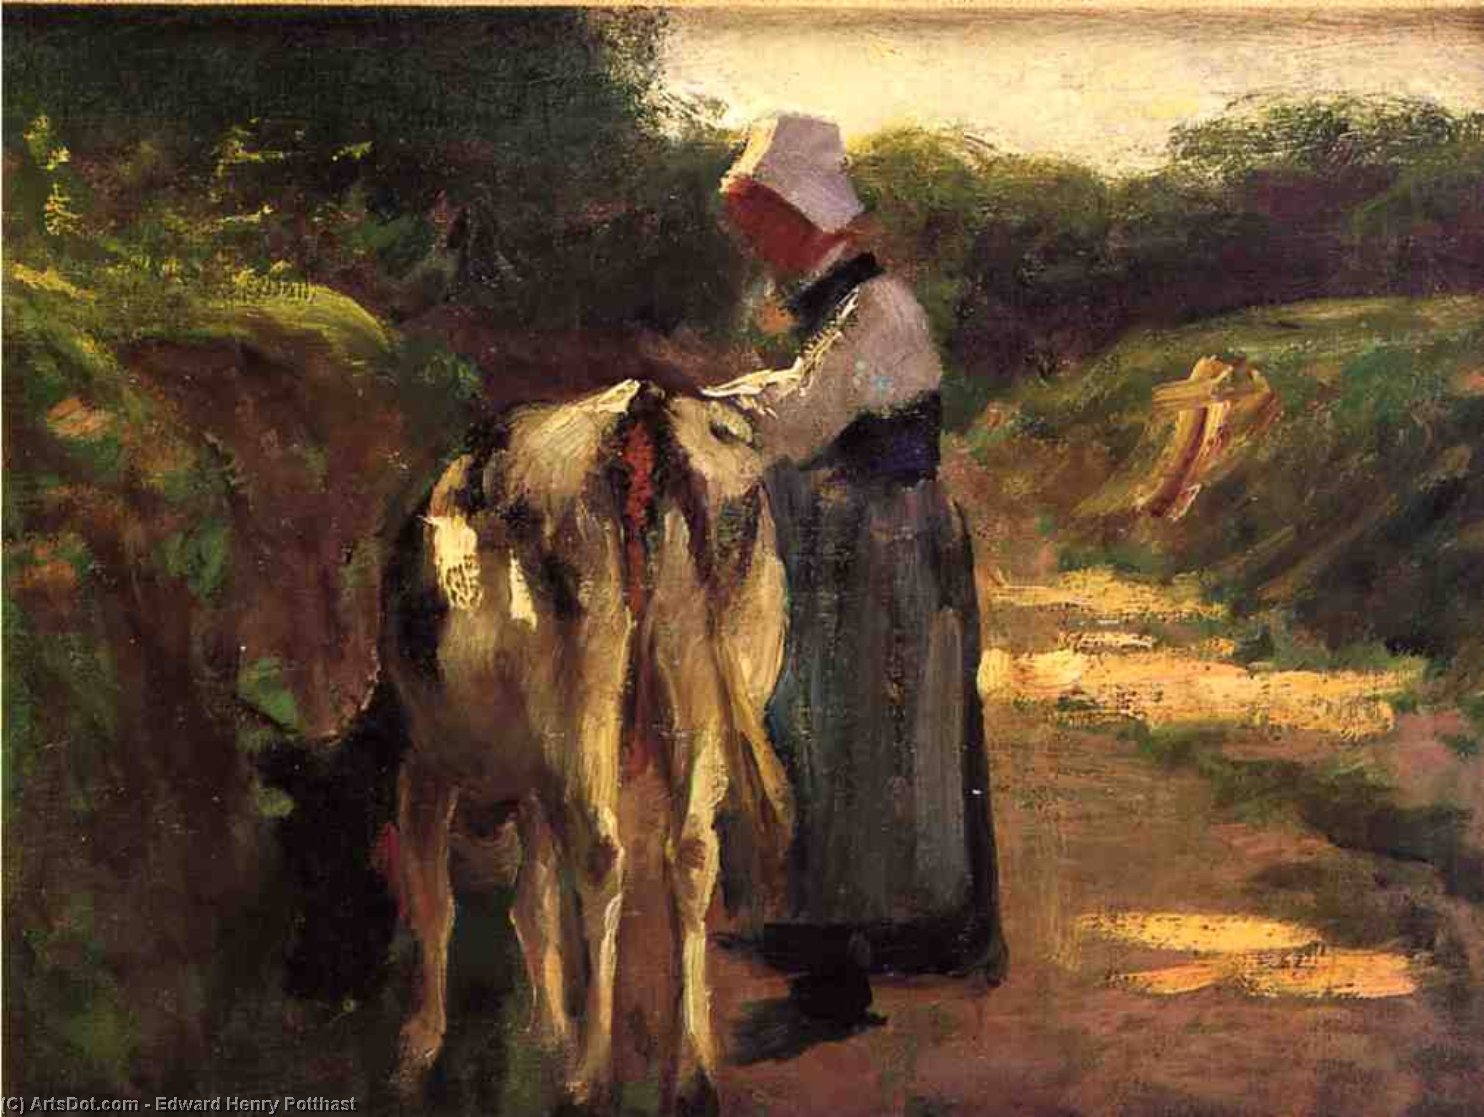 Buy Museum Art Reproductions Grazing by the Roadside by Edward Henry Potthast (1857-1927, United States) | ArtsDot.com